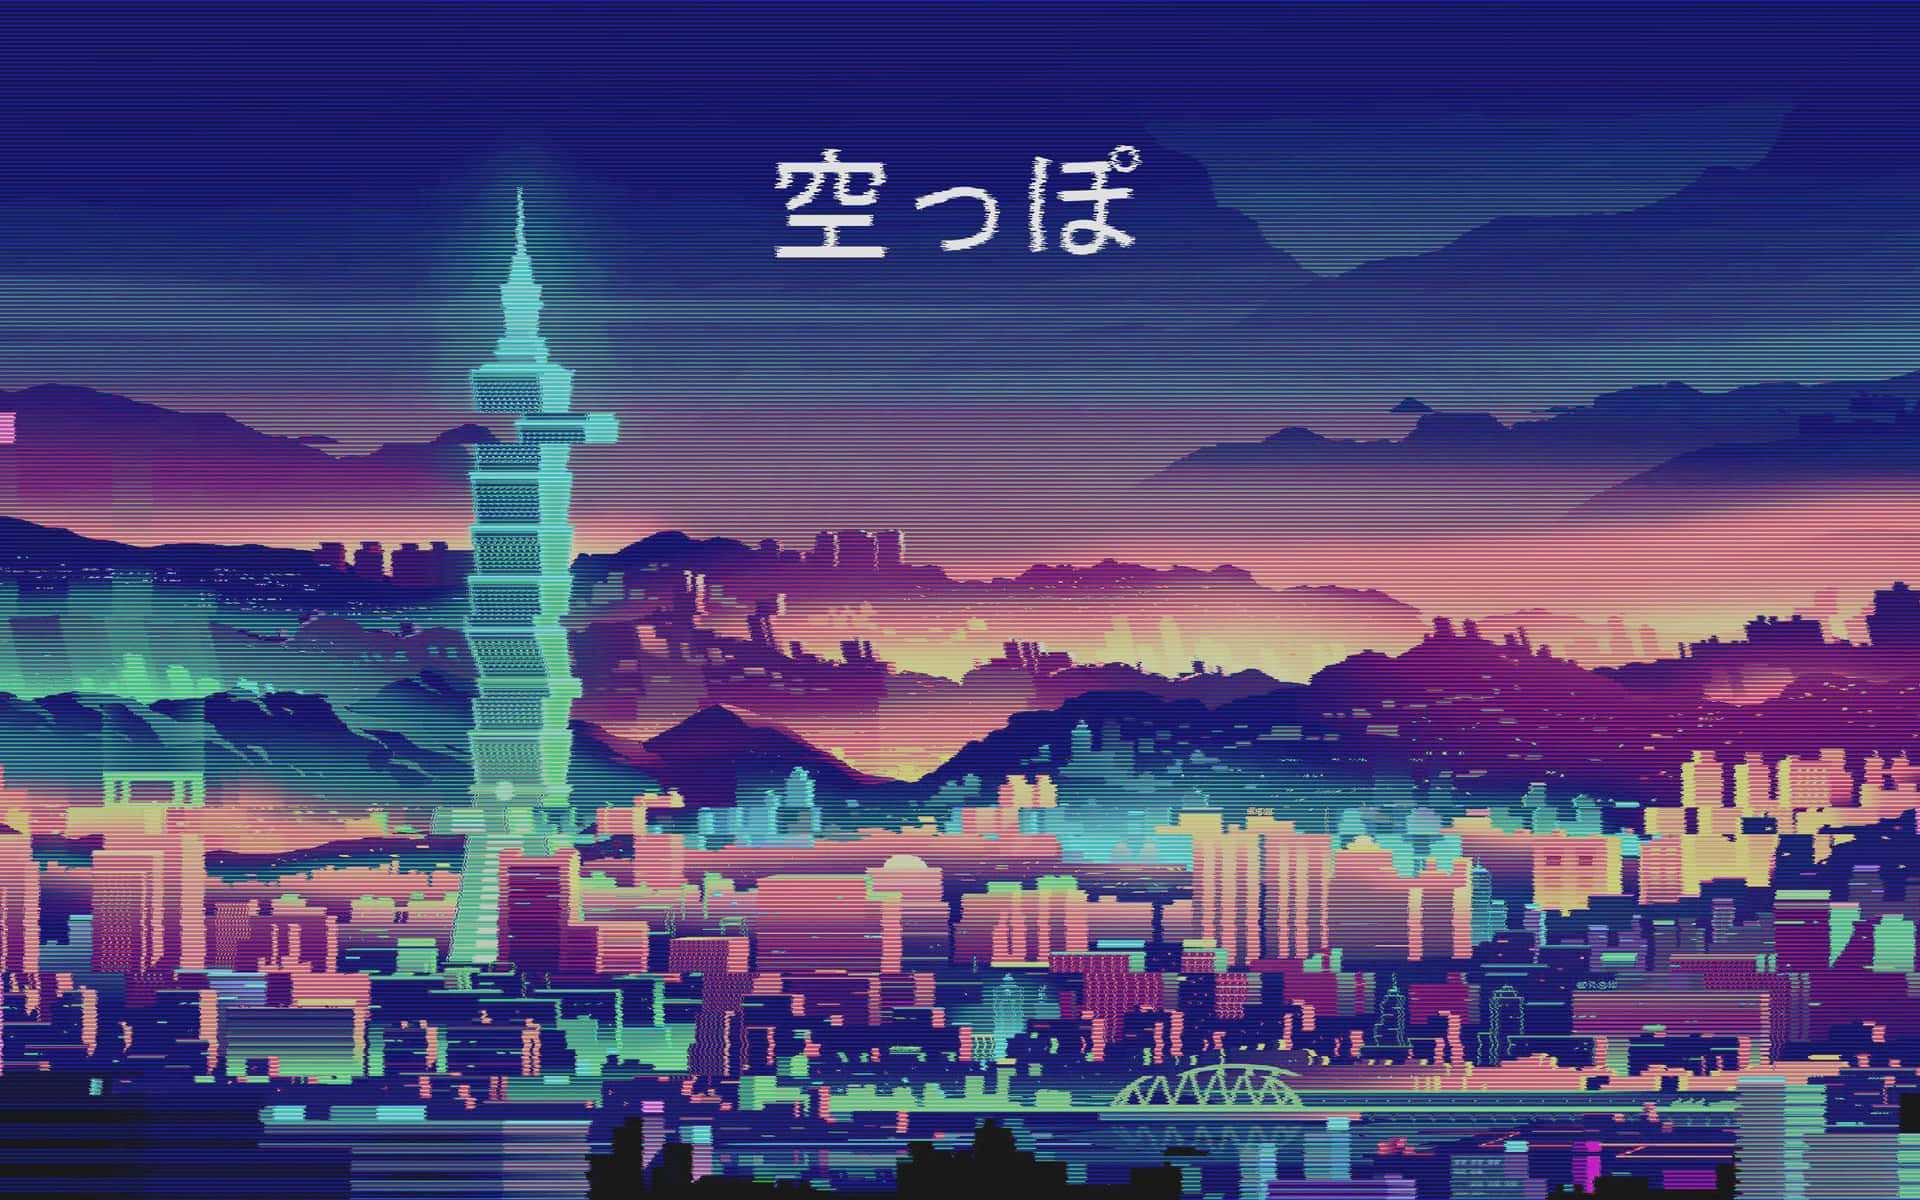 A Cityscape With Neon Lights And Chinese Characters